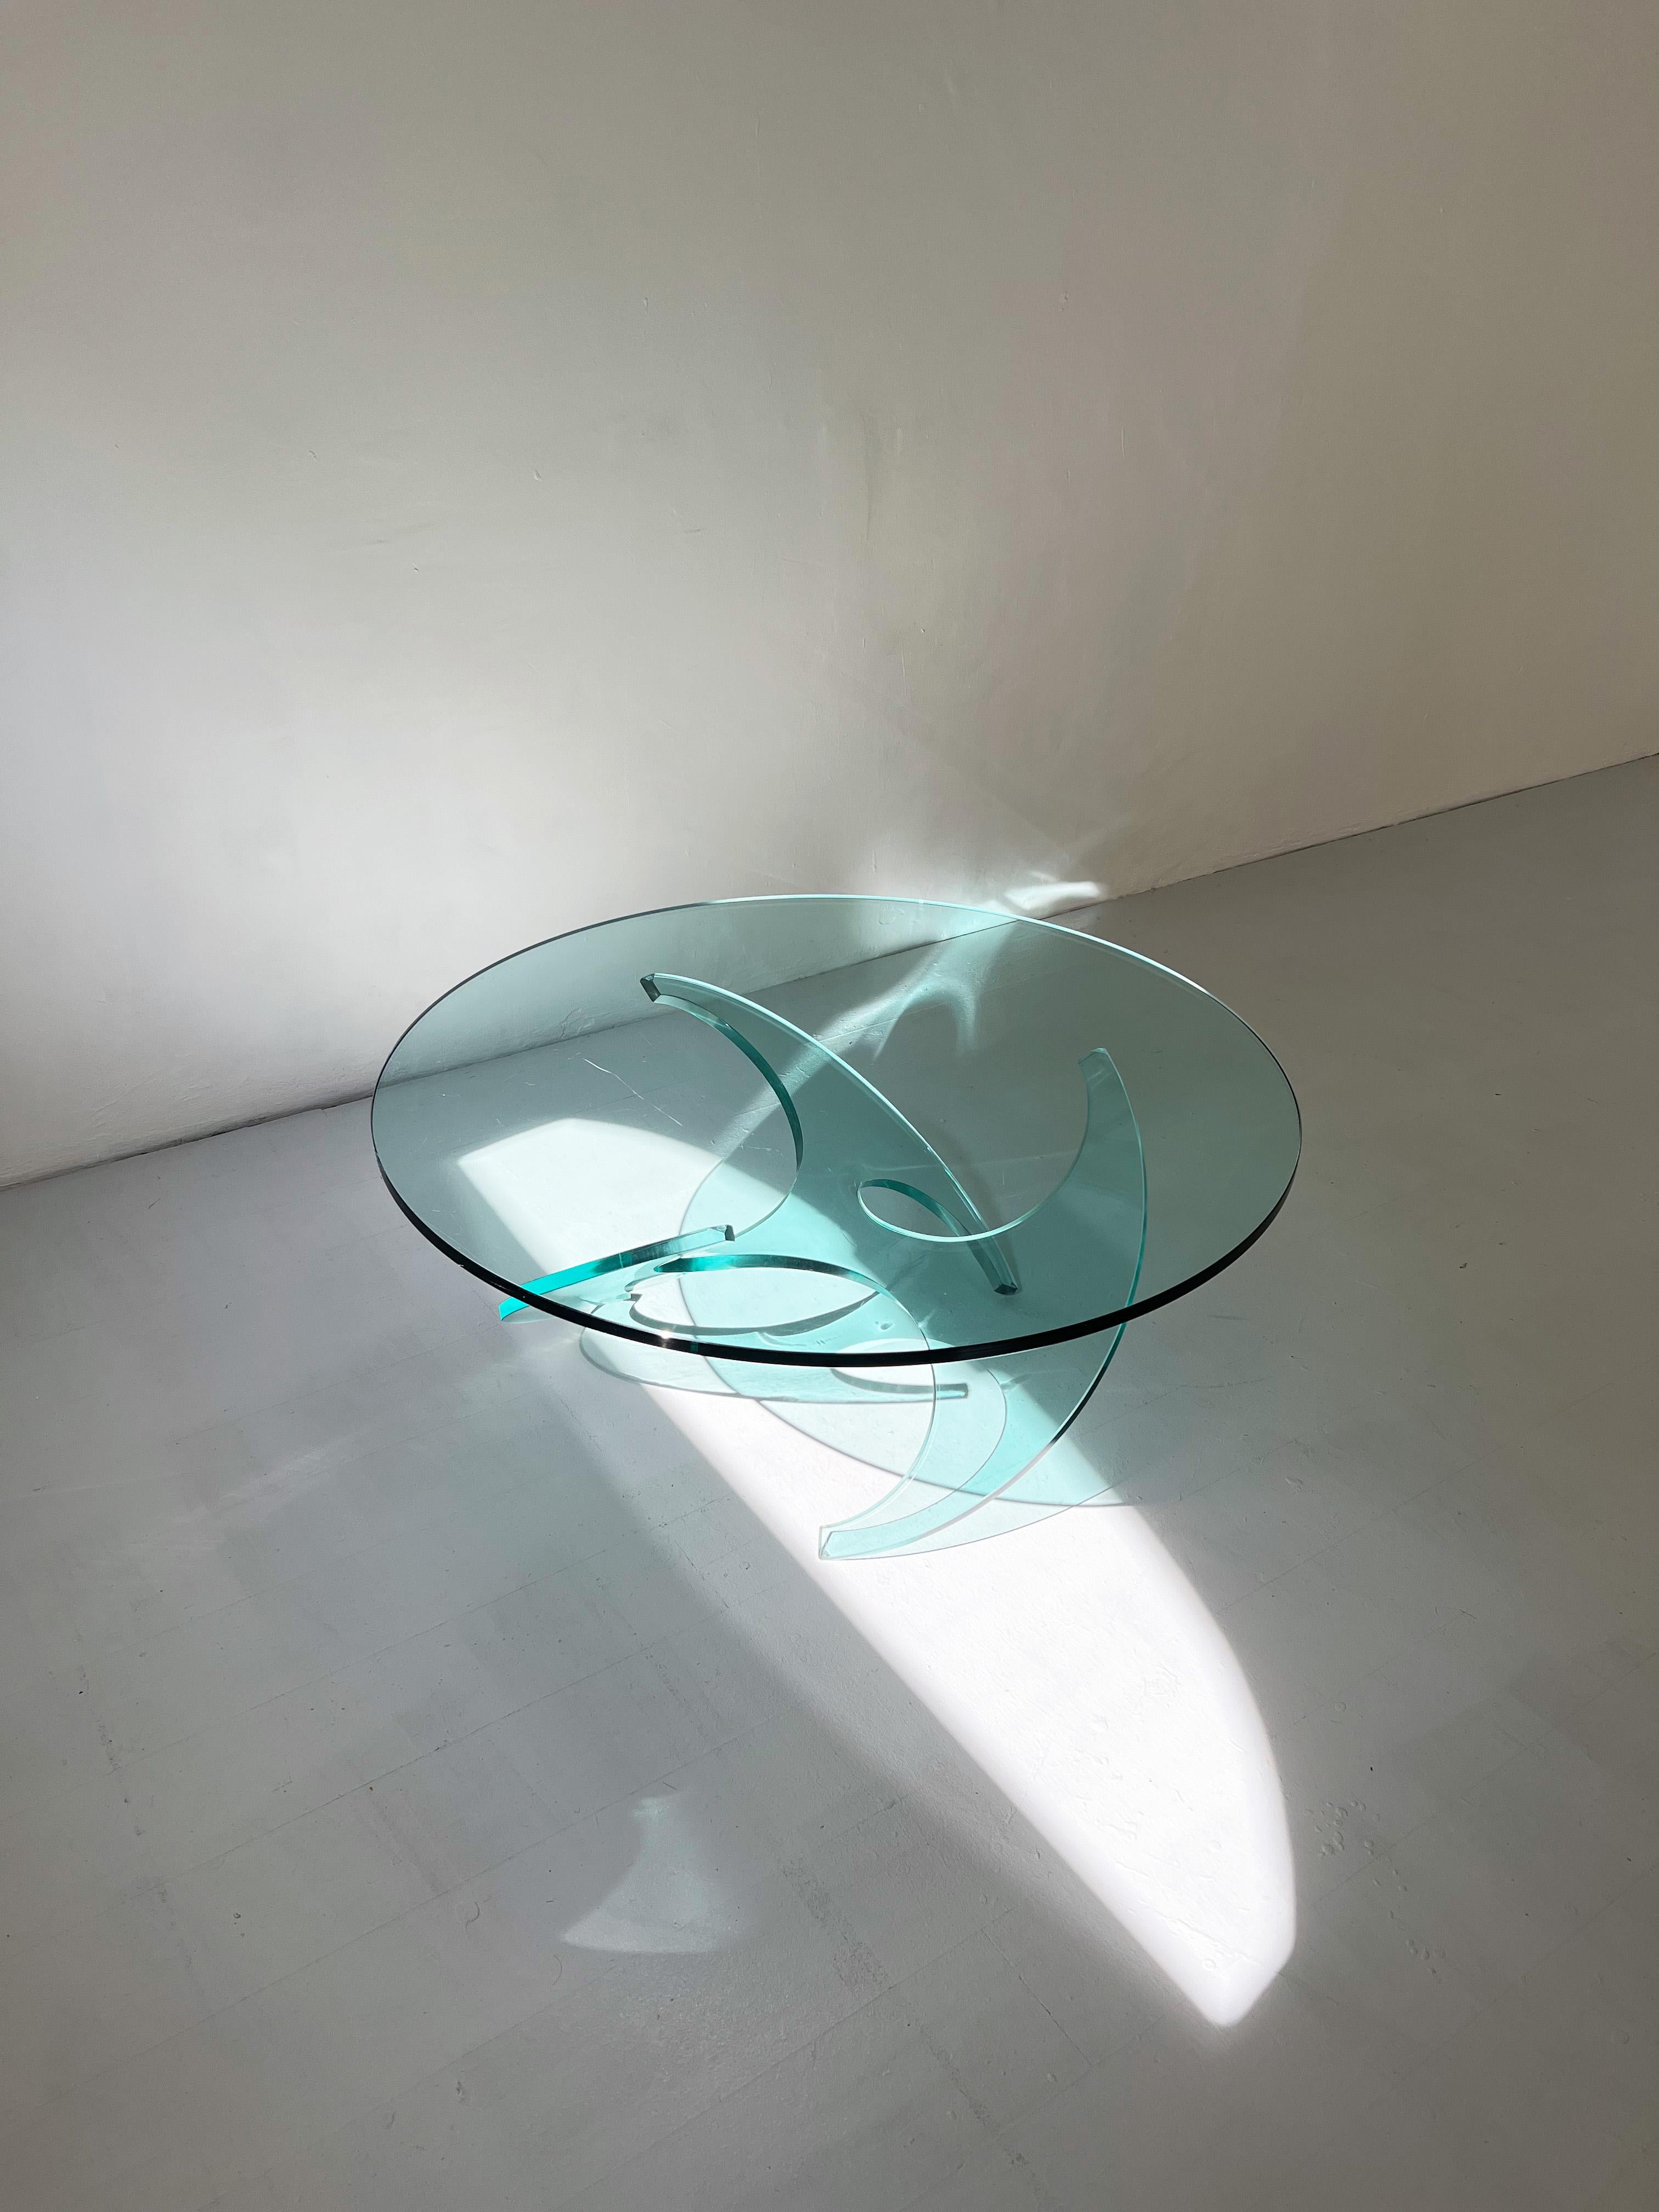 
The coffee table designed by Knut Hesterberg for Ronald Schmitt in 1960s Germany is a true masterpiece of mid-century modern design. Crafted entirely from glass with a substantial 1.8cm thickness, it exudes an air of elegance and sophistication